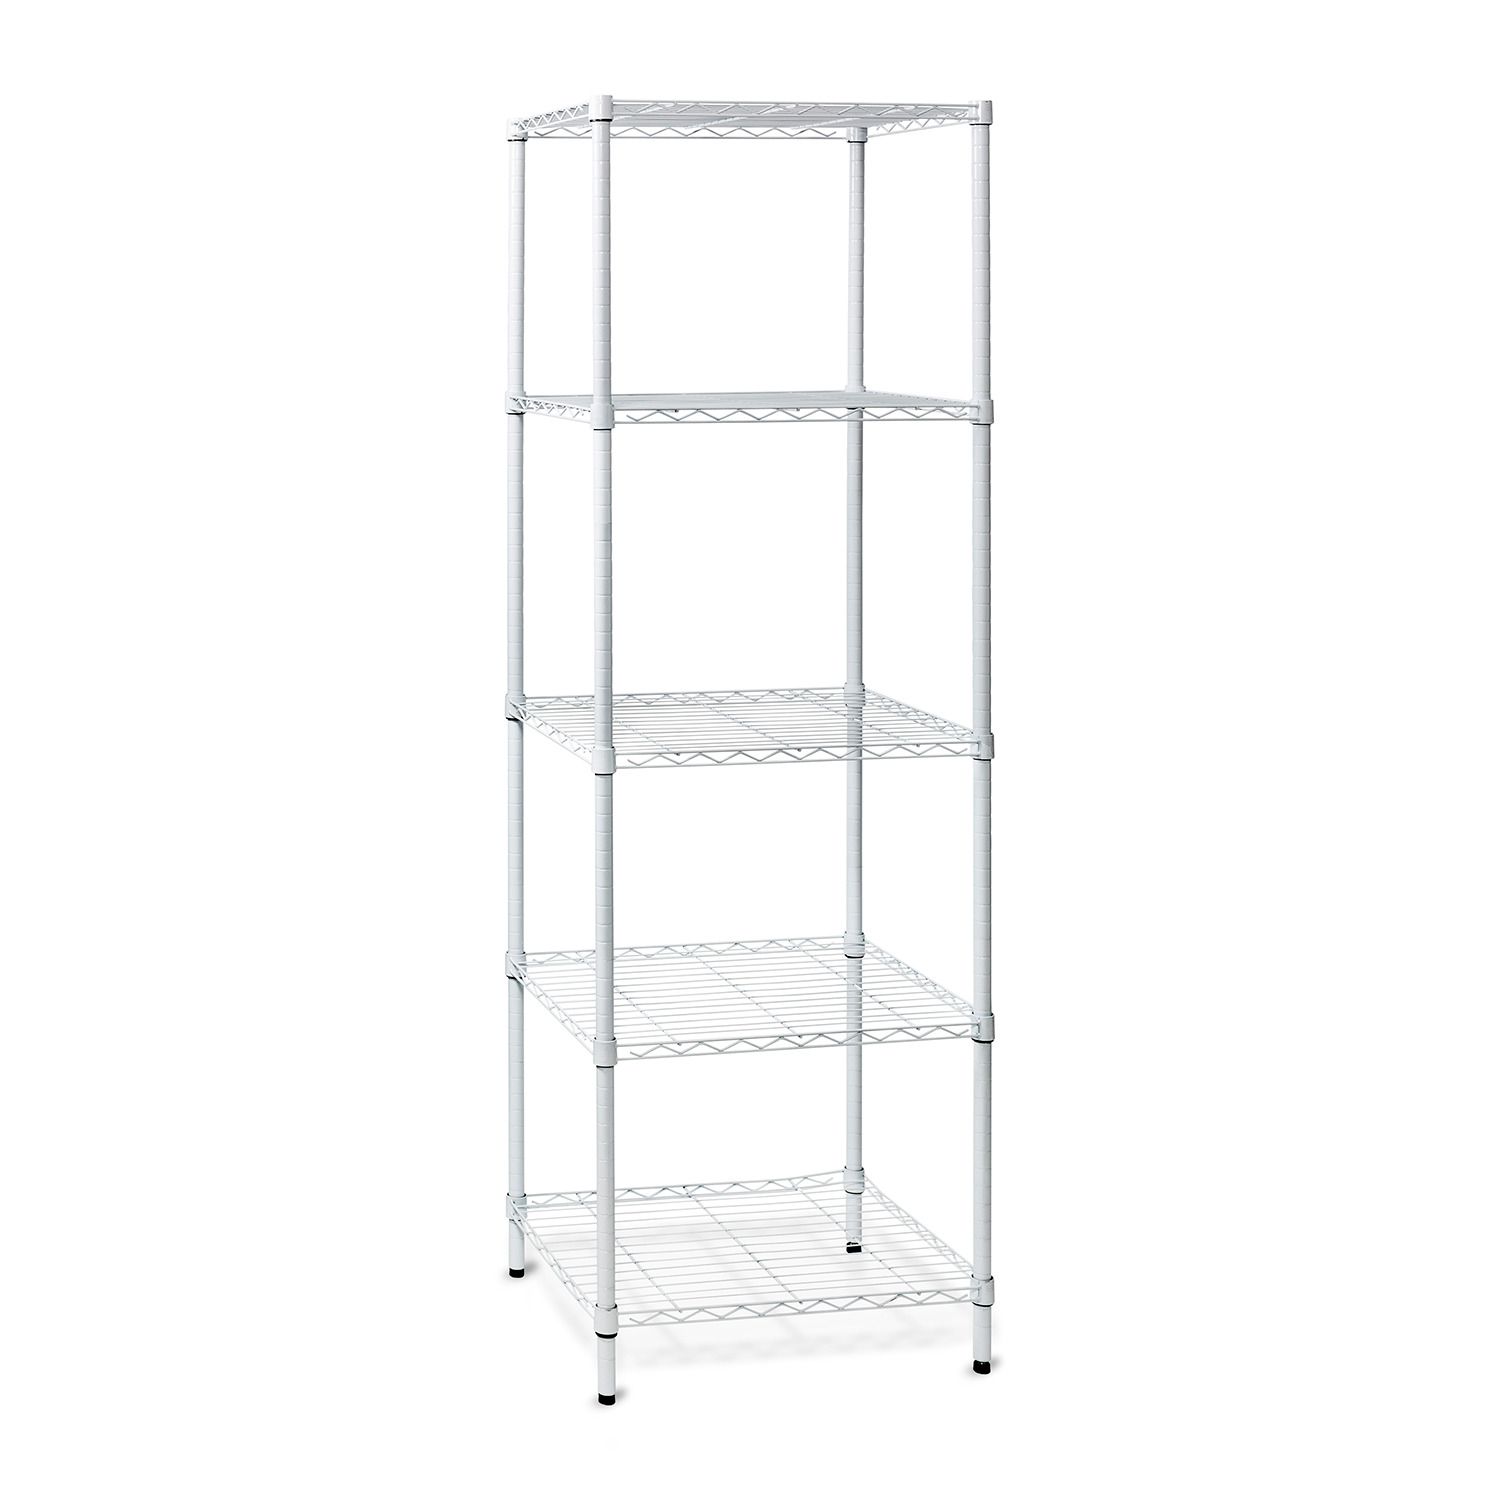 Image for Honey-Can-Do 5-Tier Adjustable Shelving Unit at Kohl's.